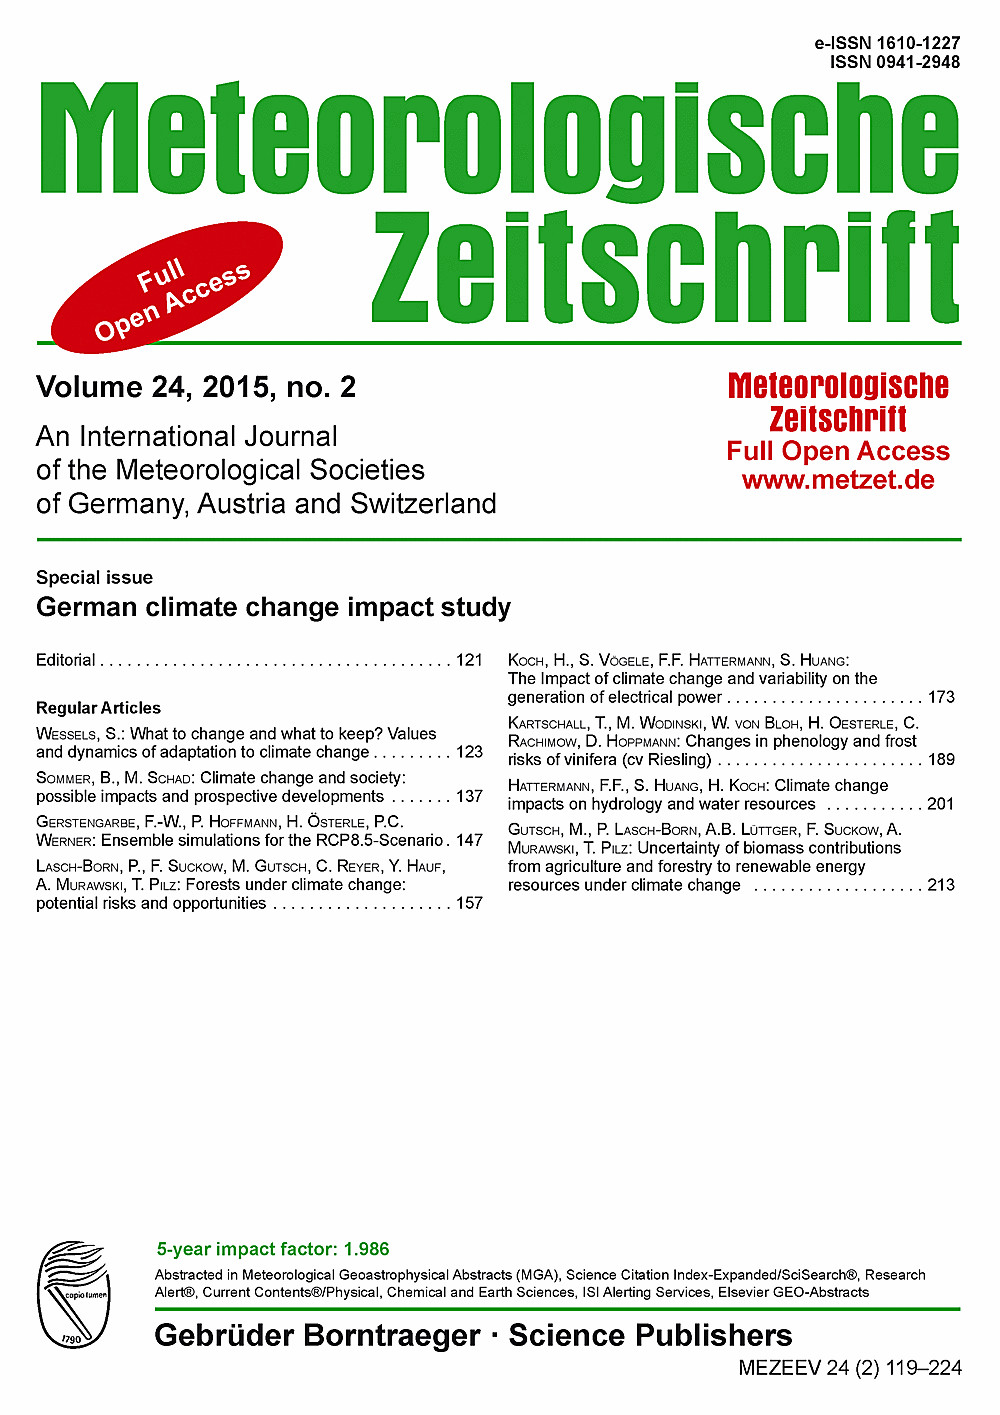 Meteorologische Zeitschrift 24/2 - Special Issue German Climate Change Impact Study - published